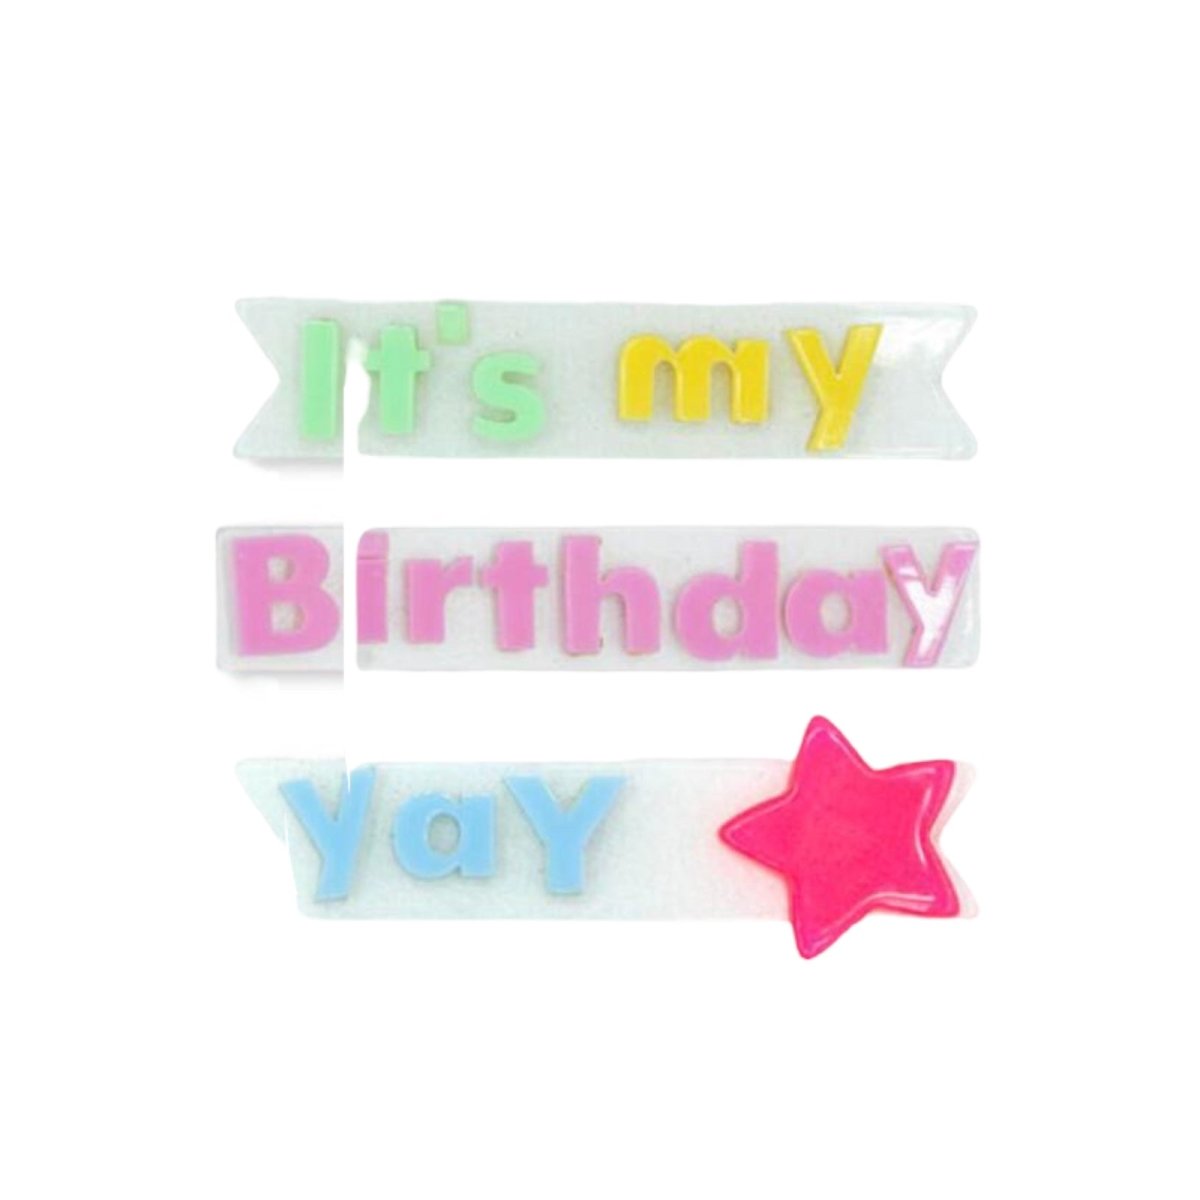 IT'S MY BIRTHDAY YAY ALLIGATOR CLIPS (PREORDER) - LILIES & ROSES